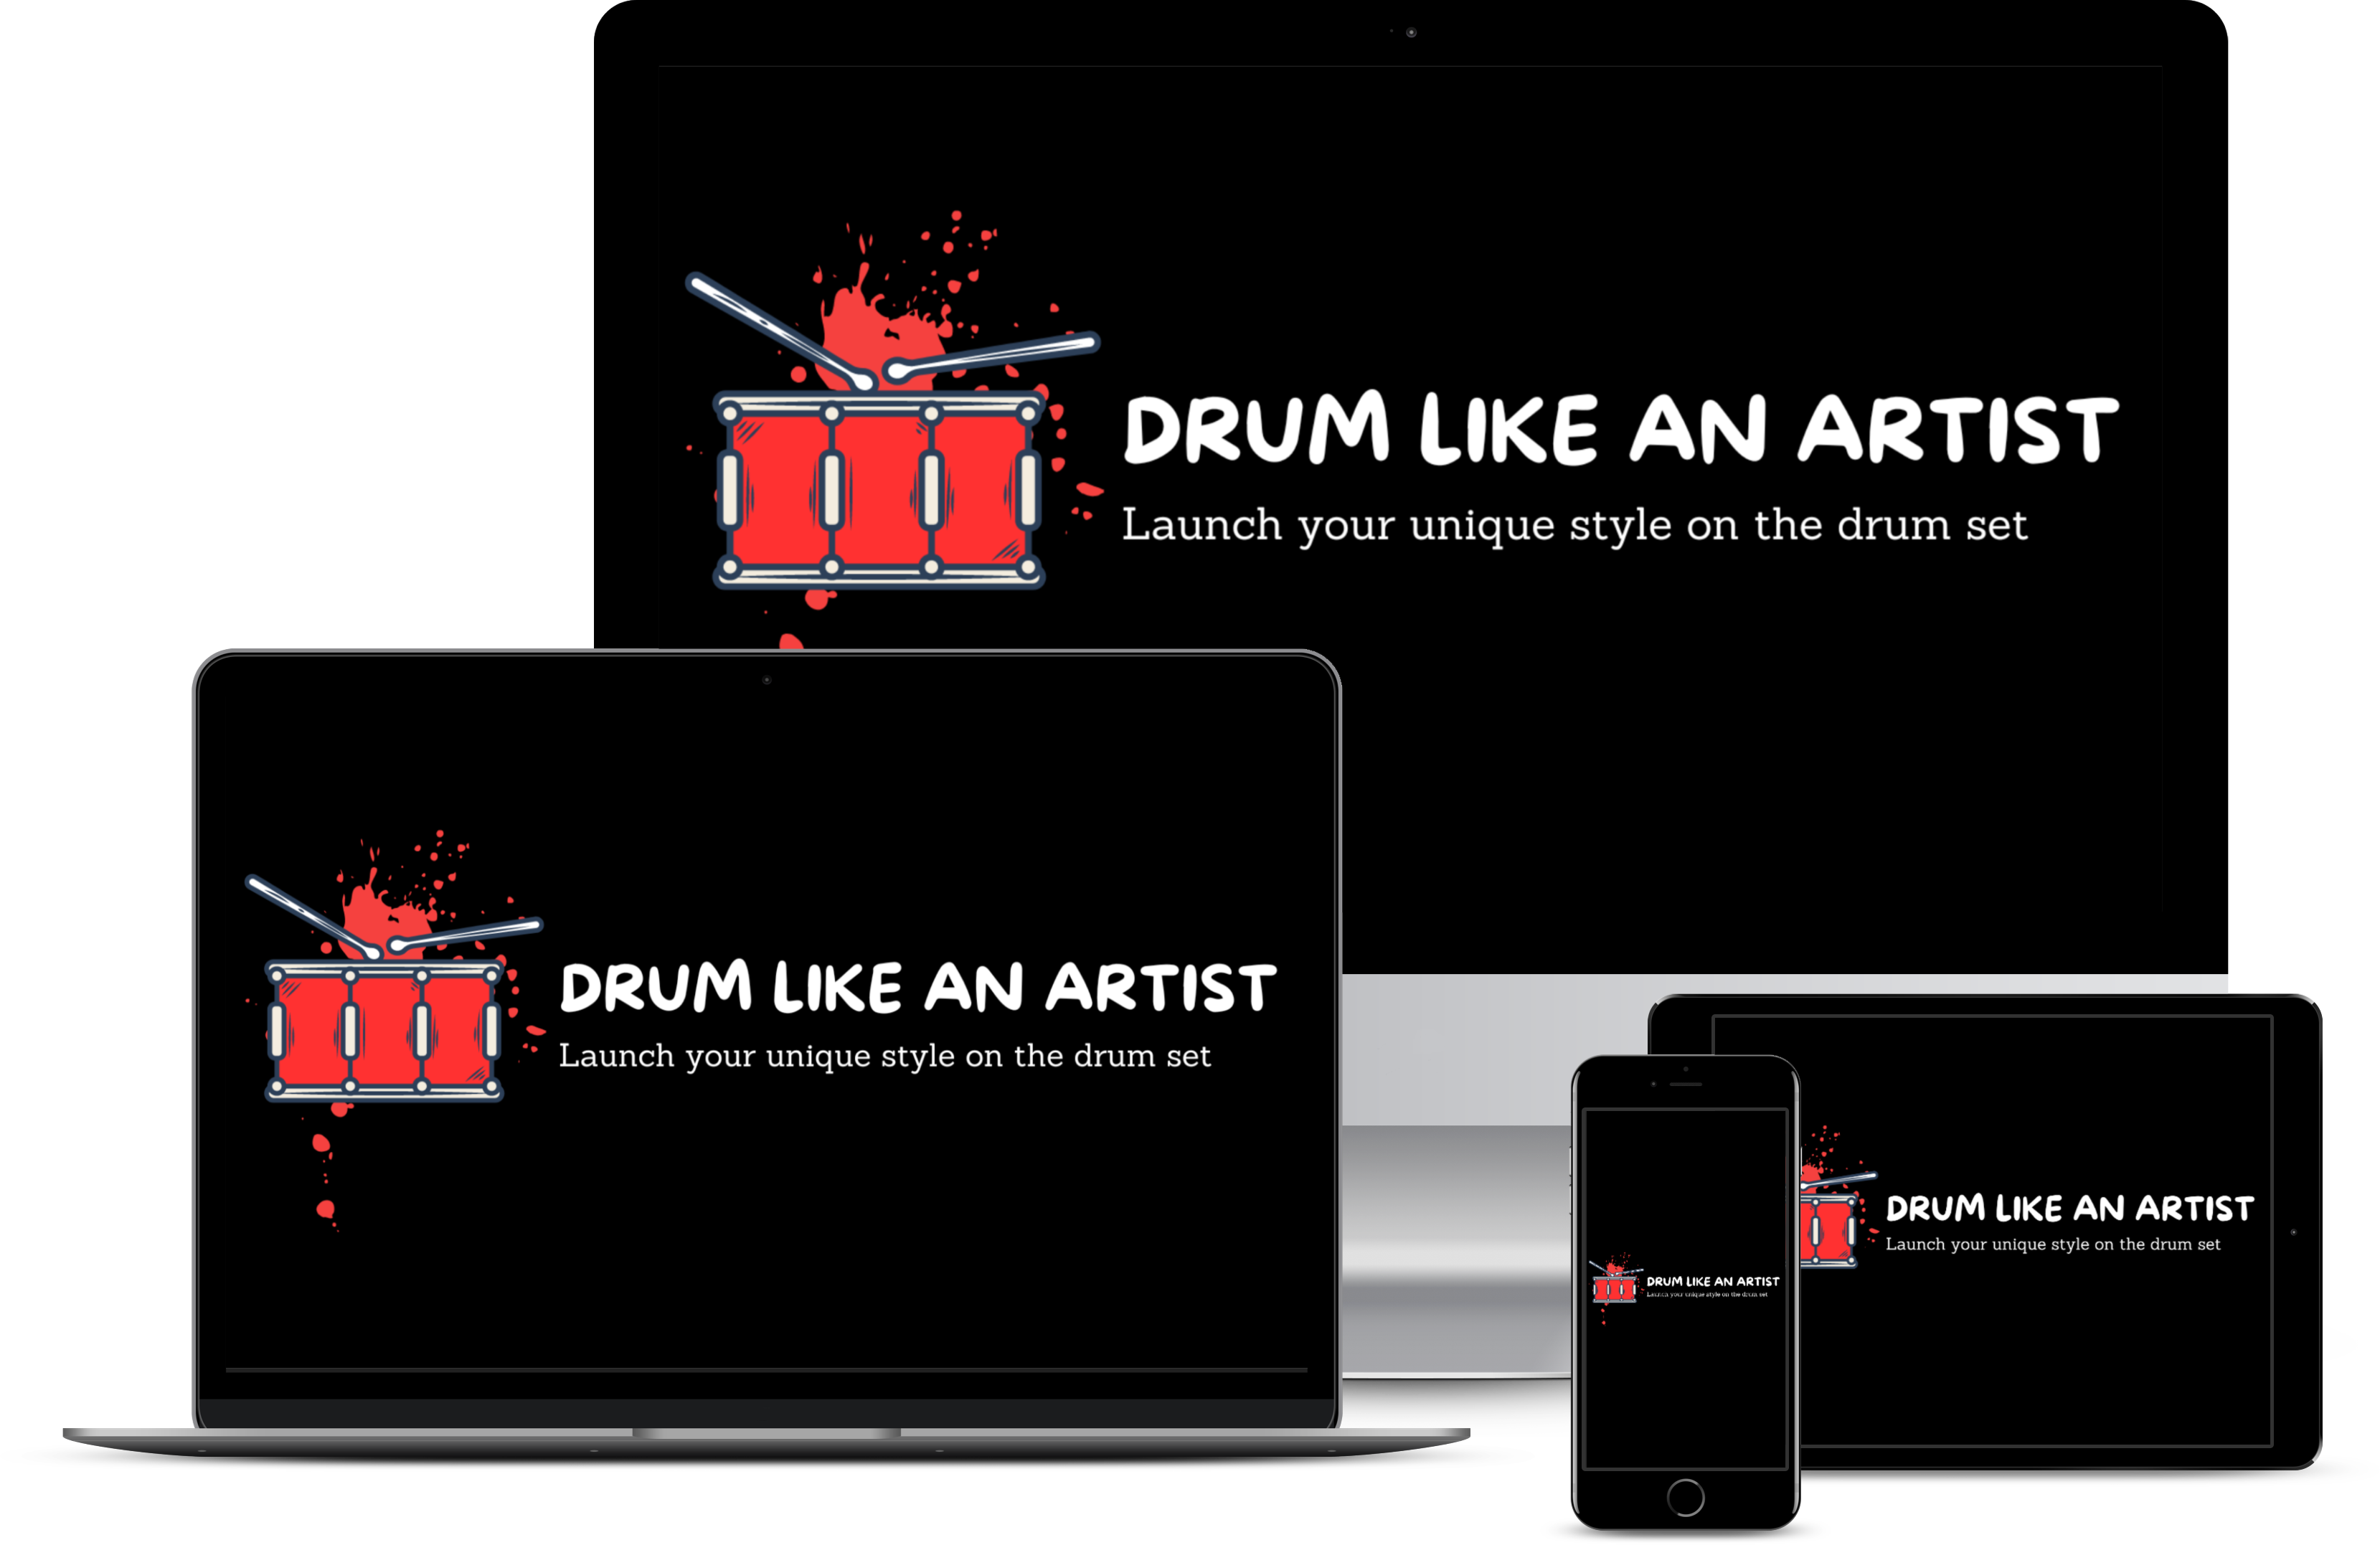 drum like an artist - launch your unique style on drums